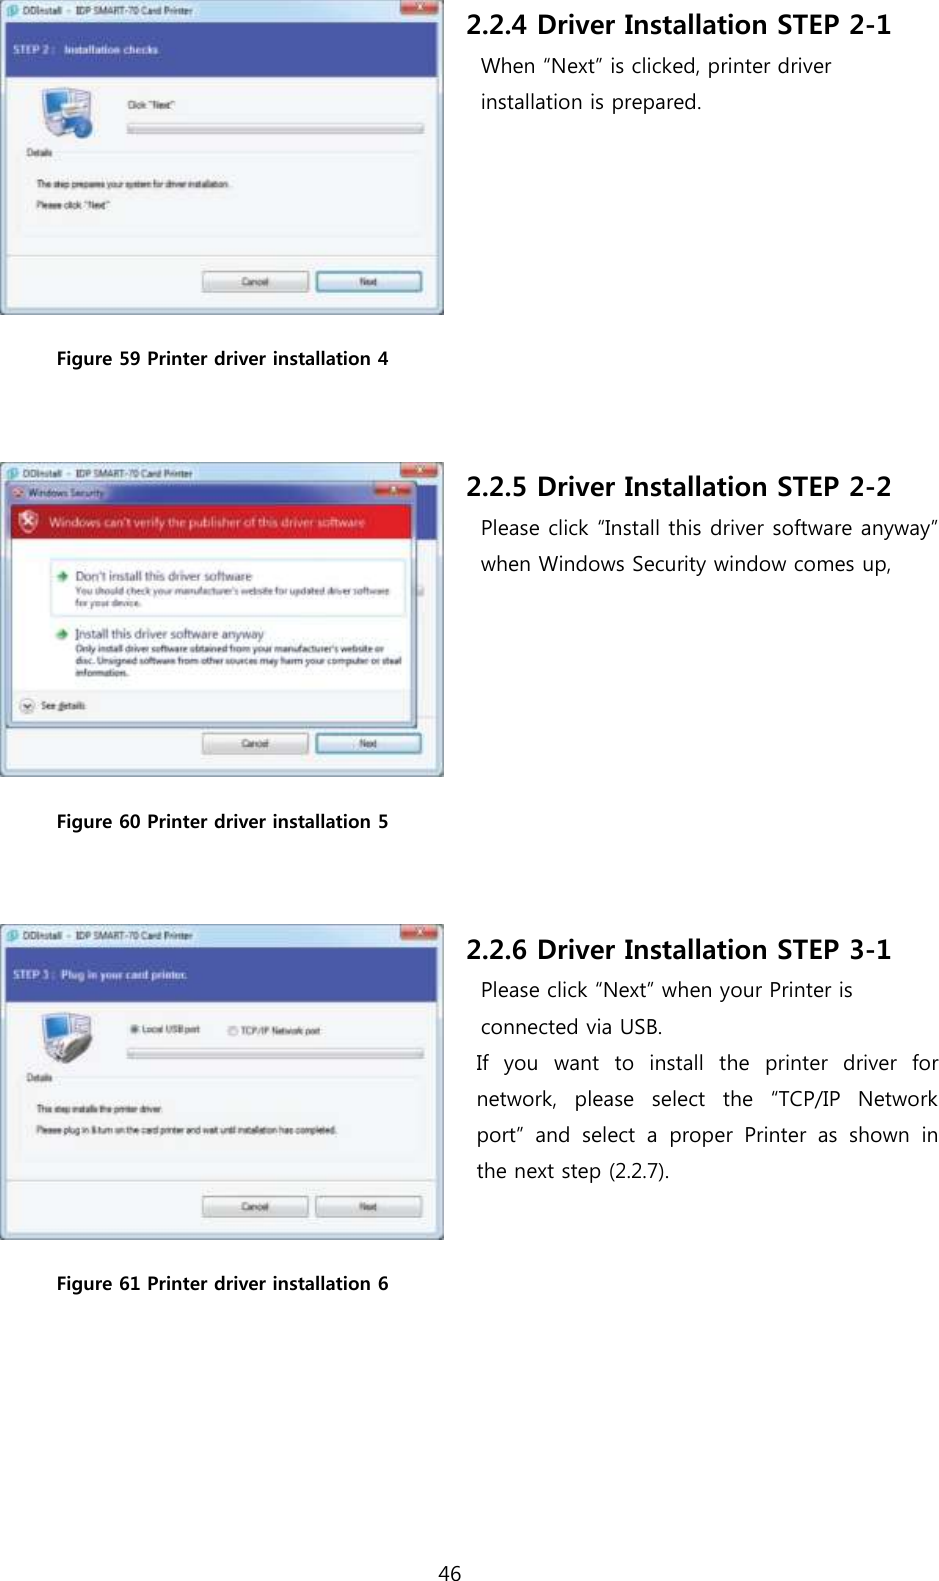 46   Figure 59 Printer driver installation 4  2.2.4 Driver Installation STEP 2-1 When “Next” is clicked, printer driver   installation is prepared.  Figure 60 Printer driver installation 5  2.2.5 Driver Installation STEP 2-2 Please click “Install this driver software anyway” when Windows Security window comes up,  Figure 61 Printer driver installation 6  2.2.6 Driver Installation STEP 3-1 Please click “Next” when your Printer is connected via USB. If  you  want  to  install  the  printer  driver  for network,  please  select  the  “TCP/IP  Network port”  and  select  a  proper  Printer  as  shown  in the next step (2.2.7).    